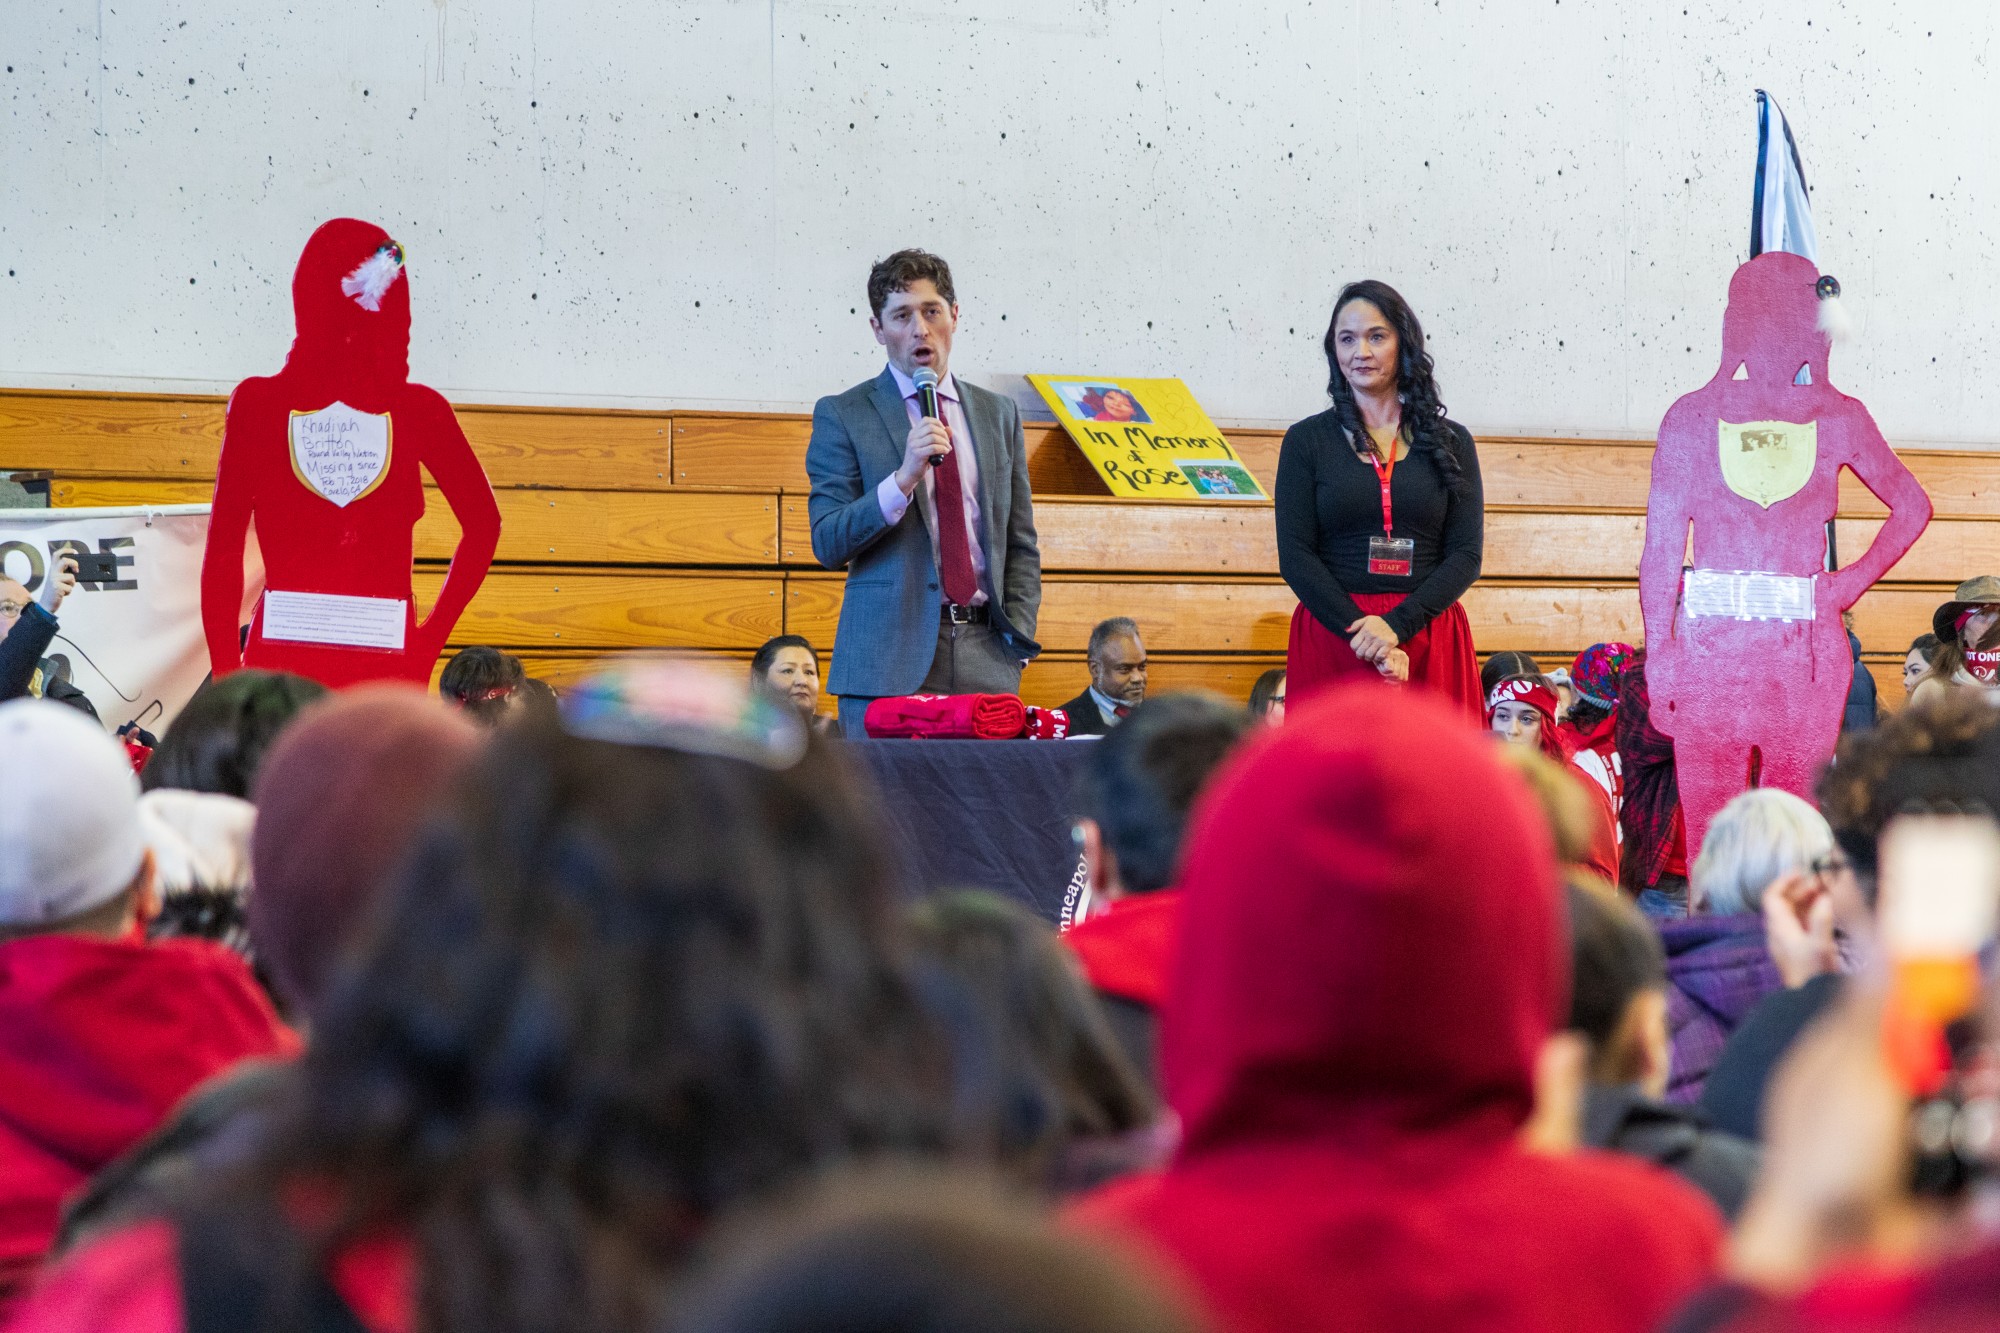 Minneapolis Mayor Jacob Frey addresses an audience at the Minneapolis American Indian Center on Friday, Feb. 14 2020. The event aimed to raise awareness on of missing and murdered Indigenous women and other issues in the community.